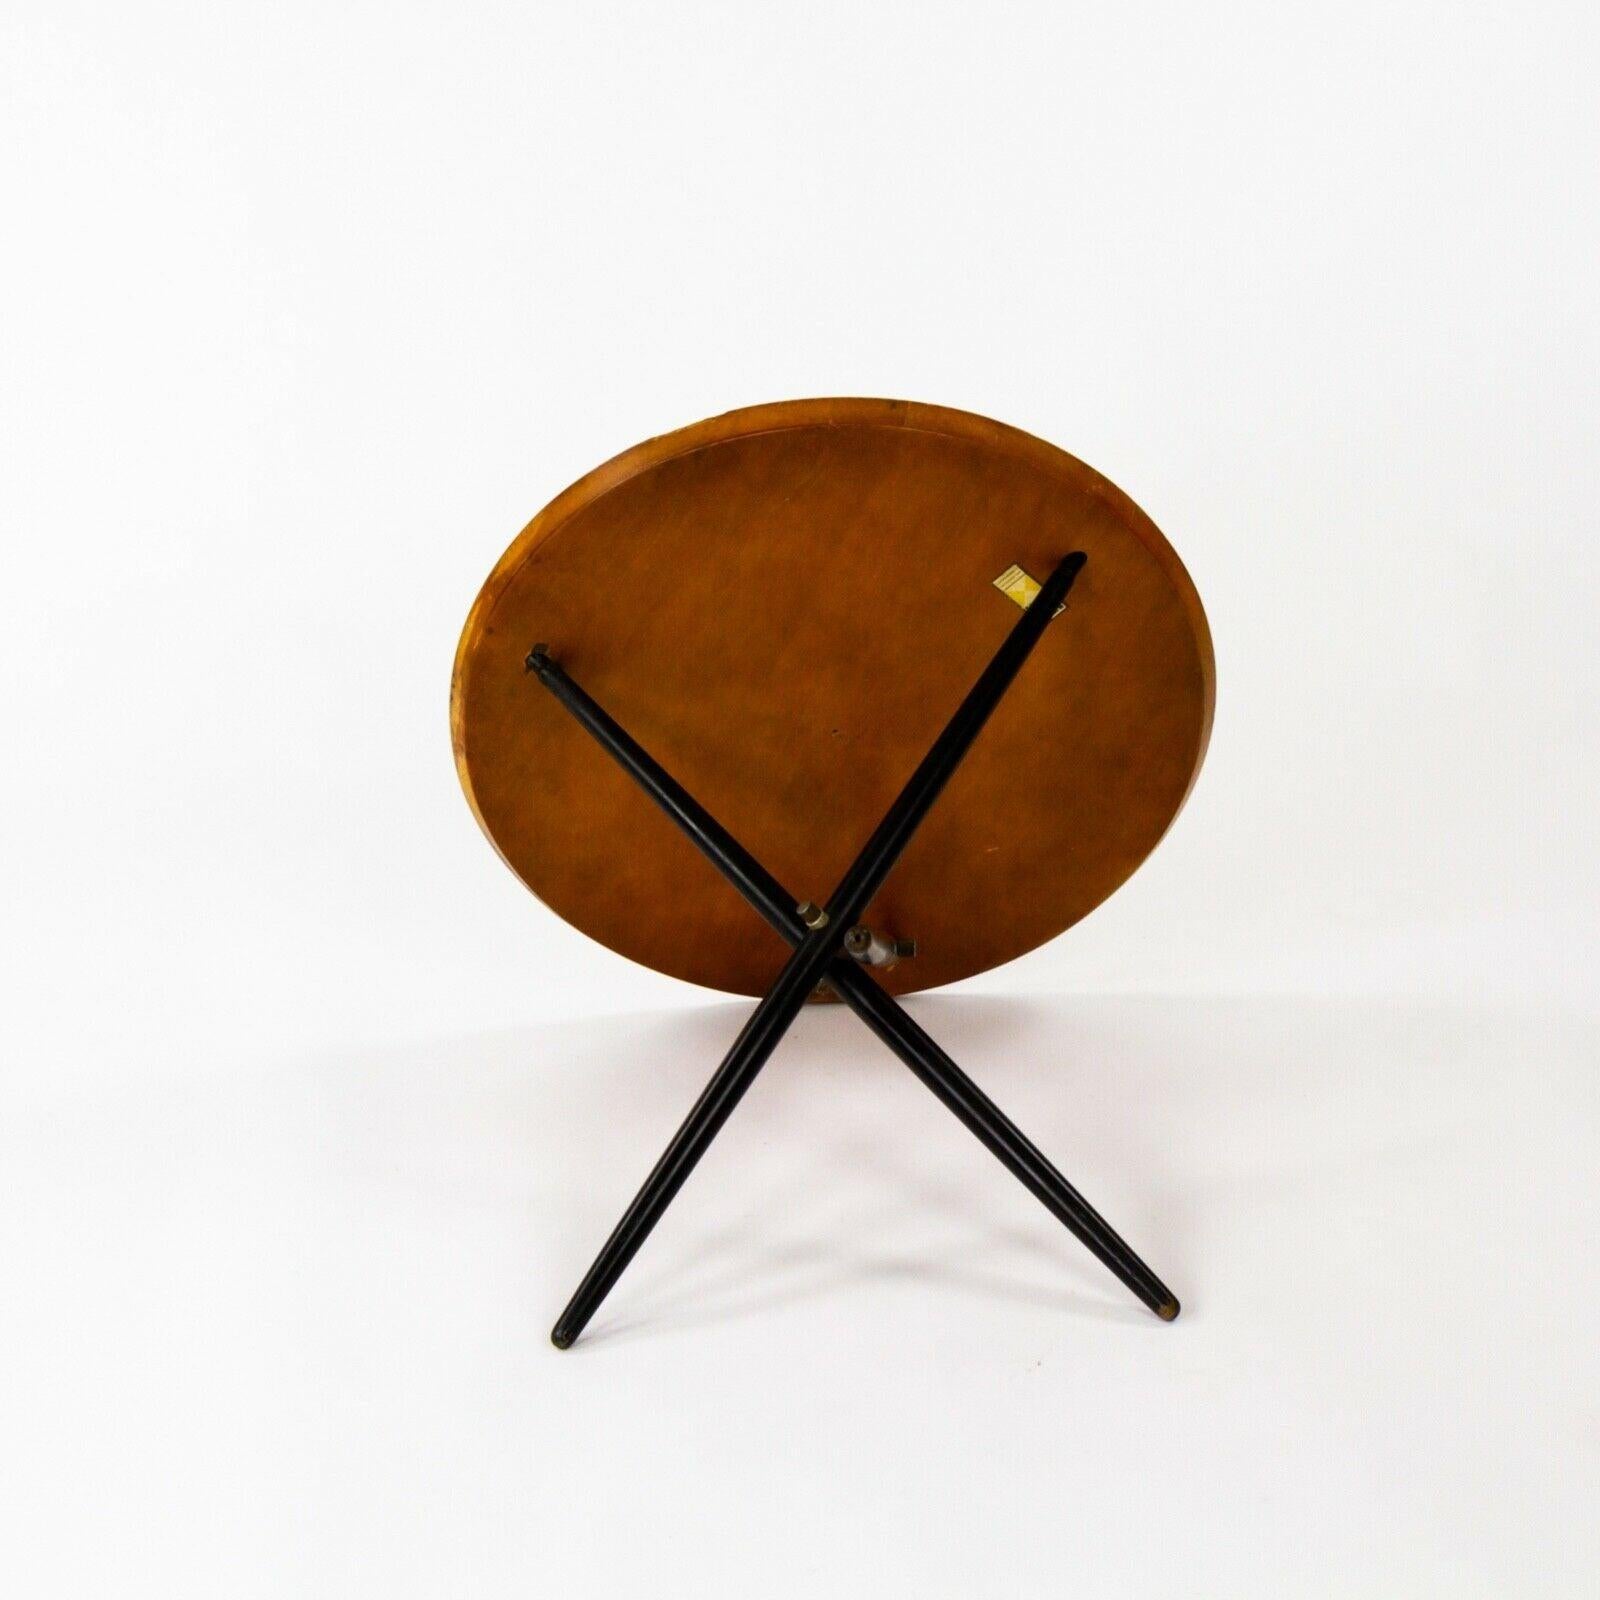 1951 Hans Bellman Small Tripod Table for Knoll Associates No 103 with 24 in Top In Good Condition For Sale In Philadelphia, PA